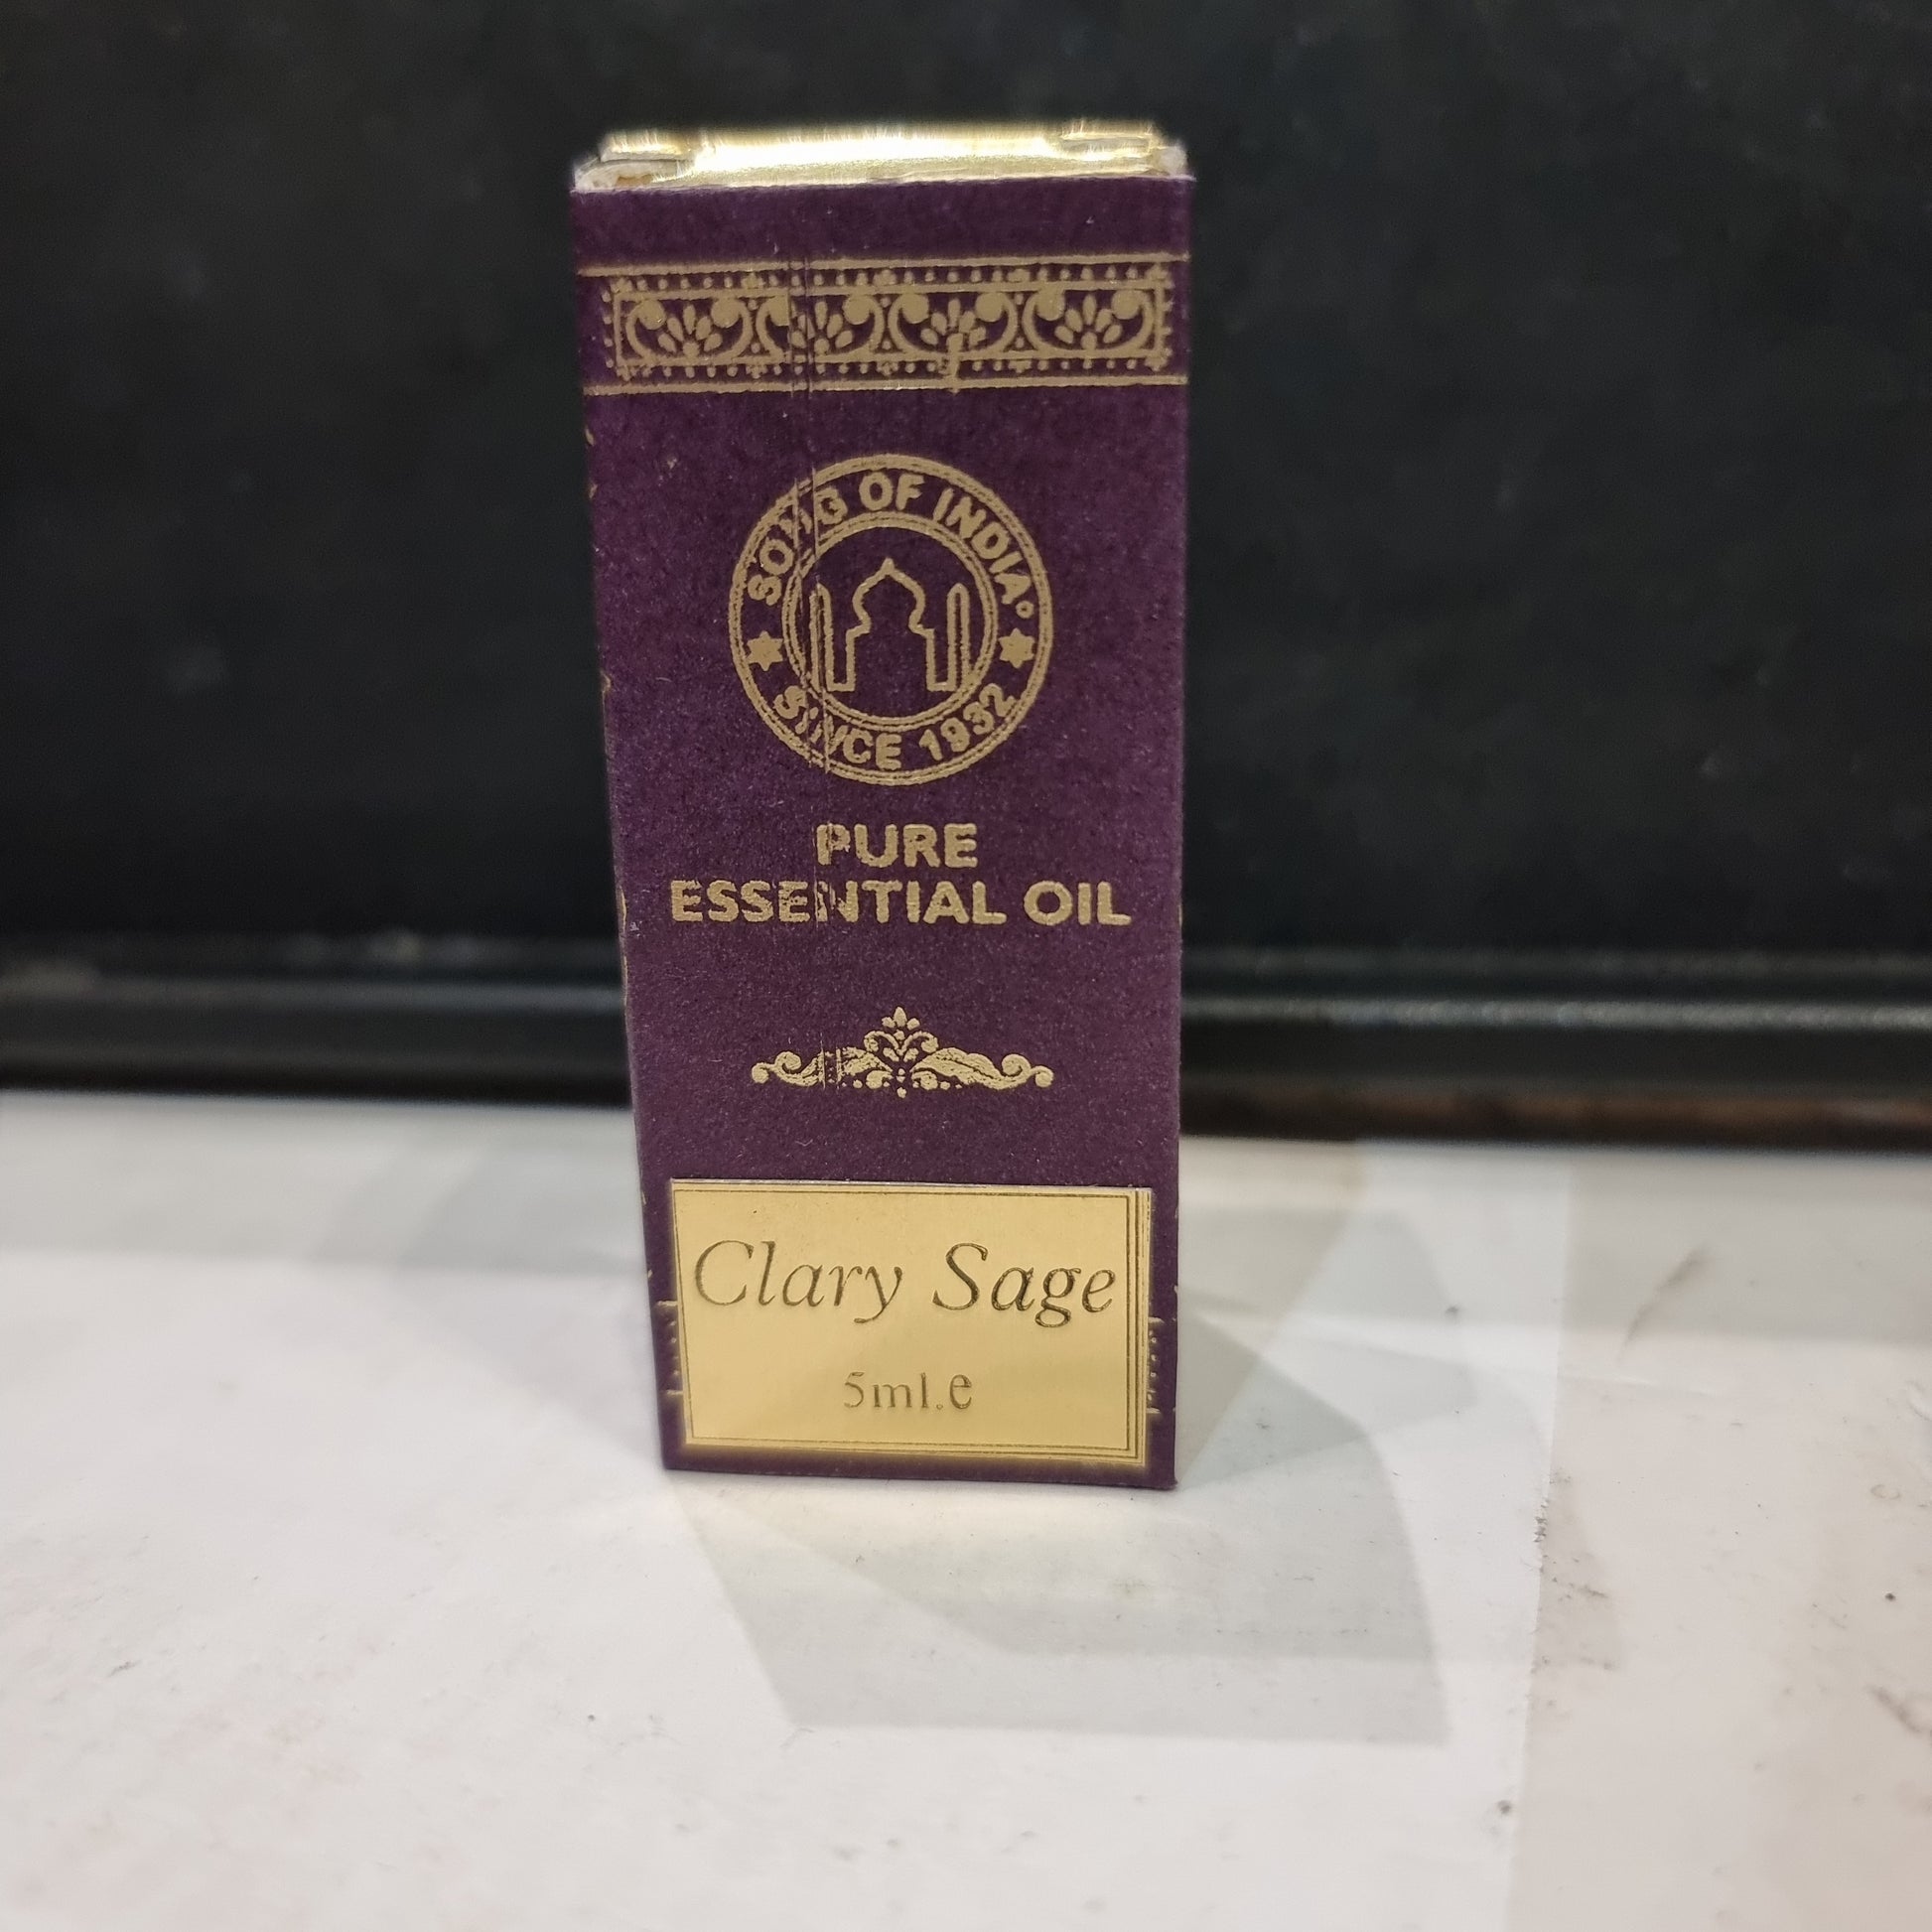 Essential Oil - Clary Sage - Rivendell Shop